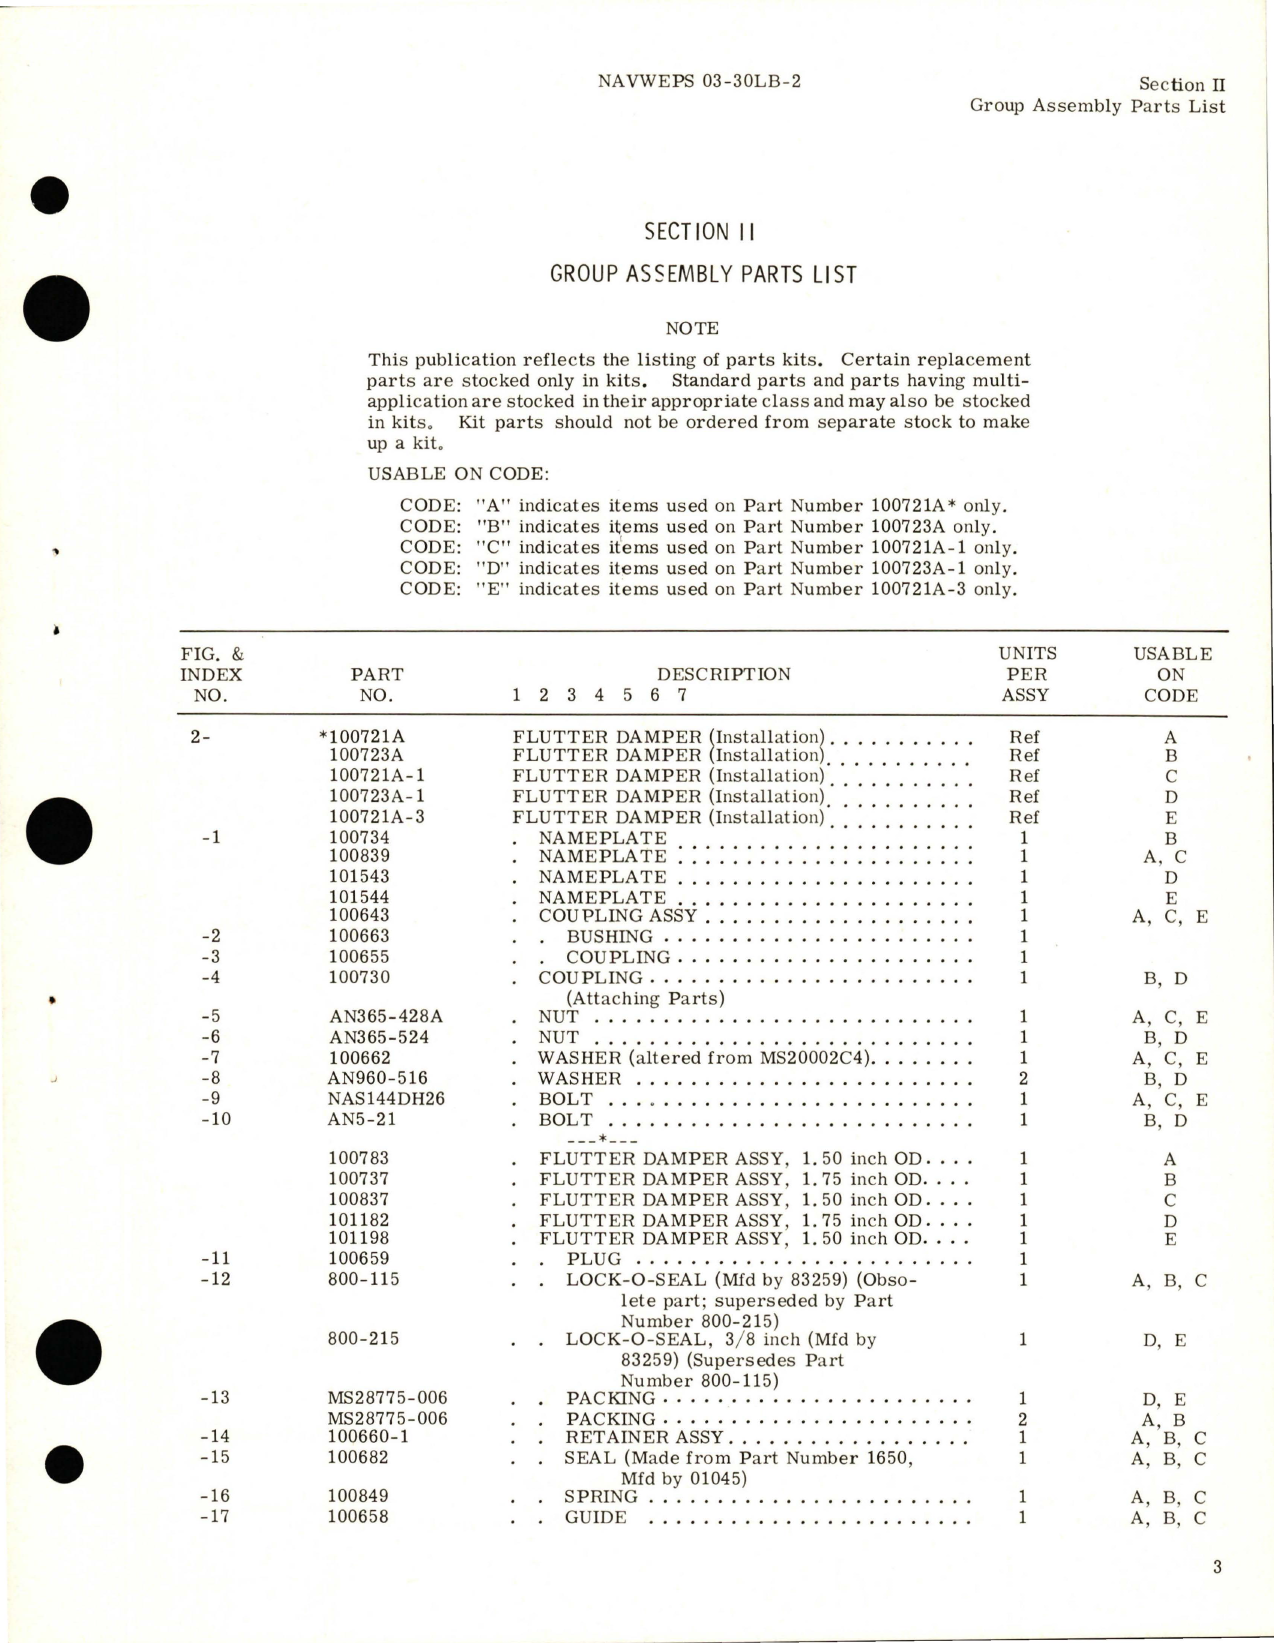 Sample page 5 from AirCorps Library document: Illustrated Parts Breakdown for Flutter Dampers - Parts 100721A, 100721A-1, 100721A-3, 100723A, and 100723A-1